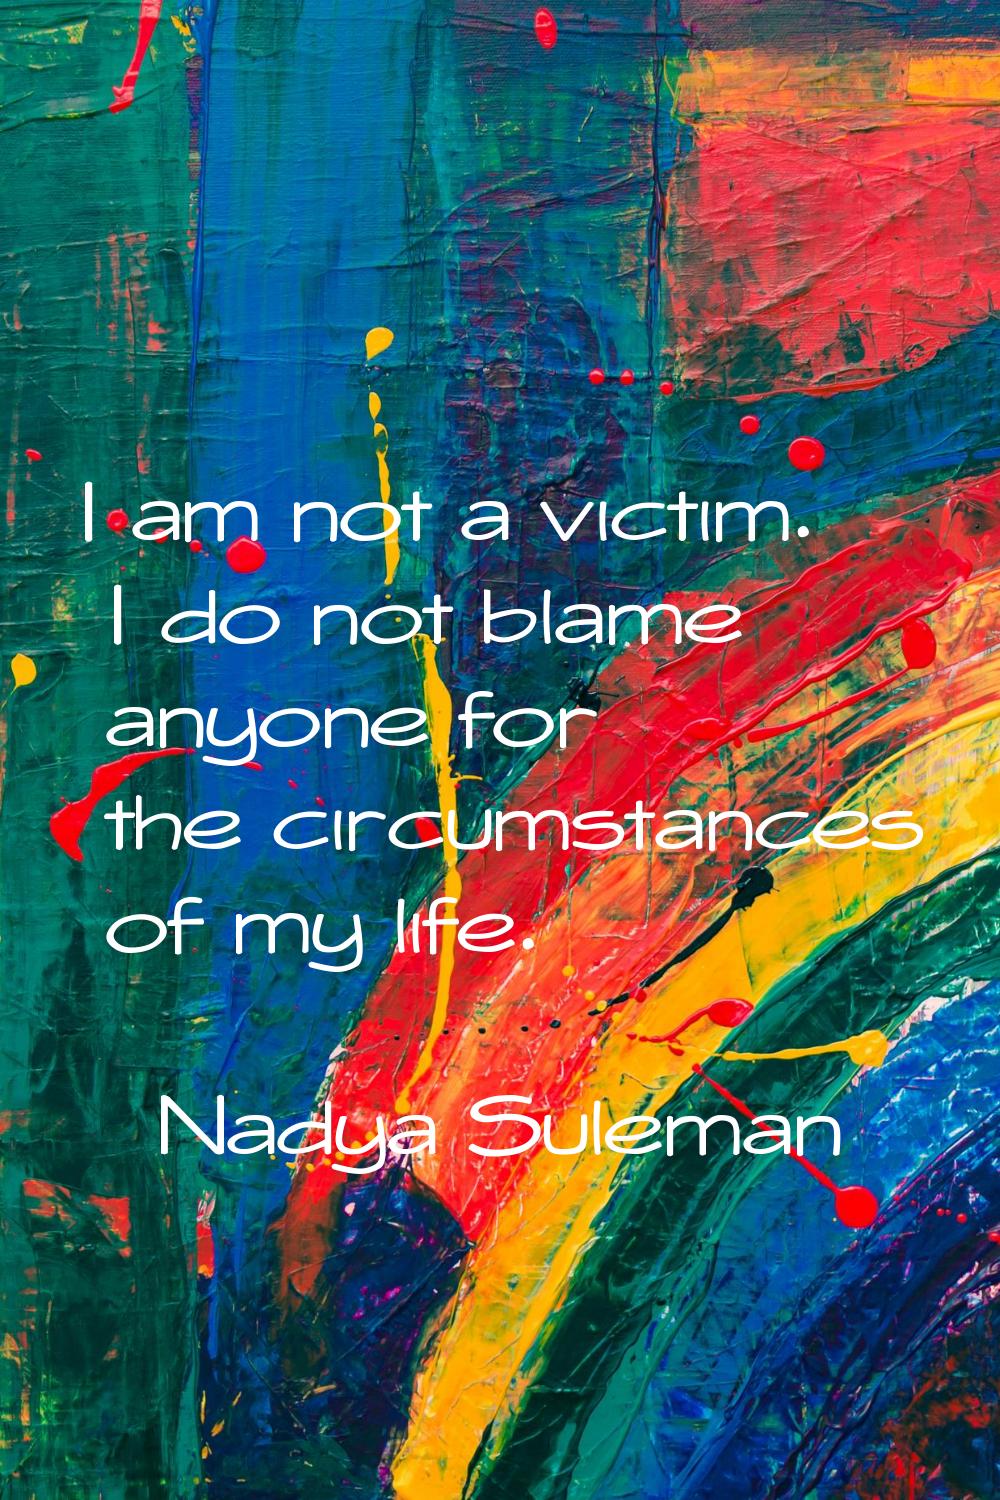 I am not a victim. I do not blame anyone for the circumstances of my life.